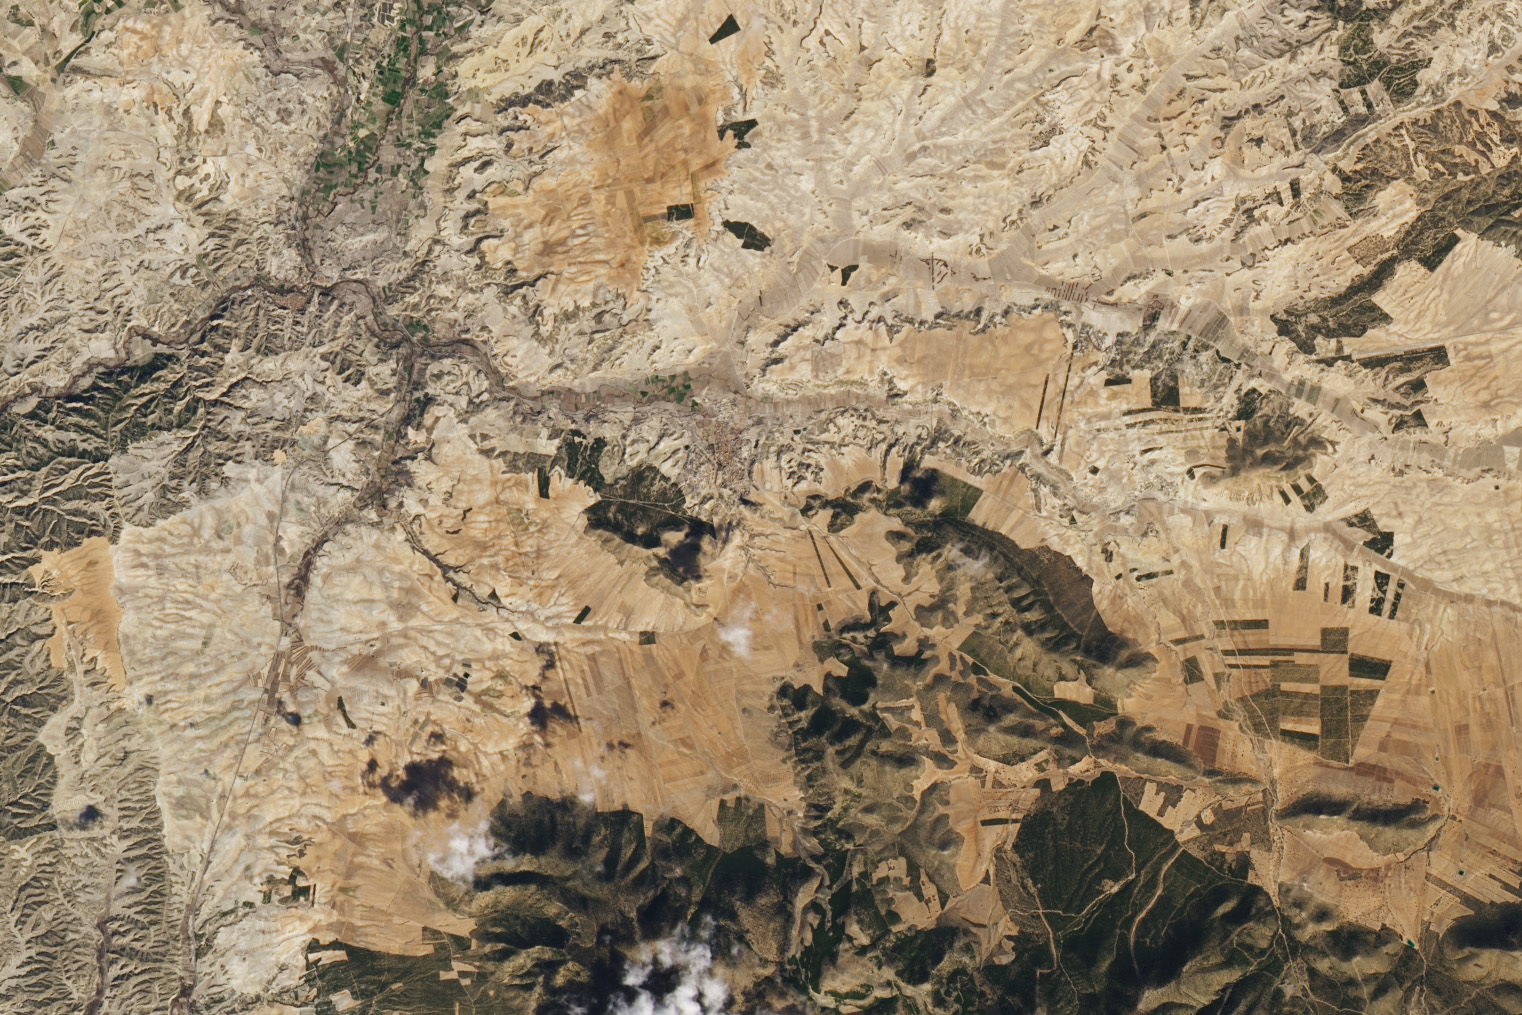 Satellite photo of largely dry light brown sandy Spain. A river runs from the middle left to the middle right side of the image and the land through this area is darker. A small dark patch of land is seen center left and bottom right there is another dark patch.